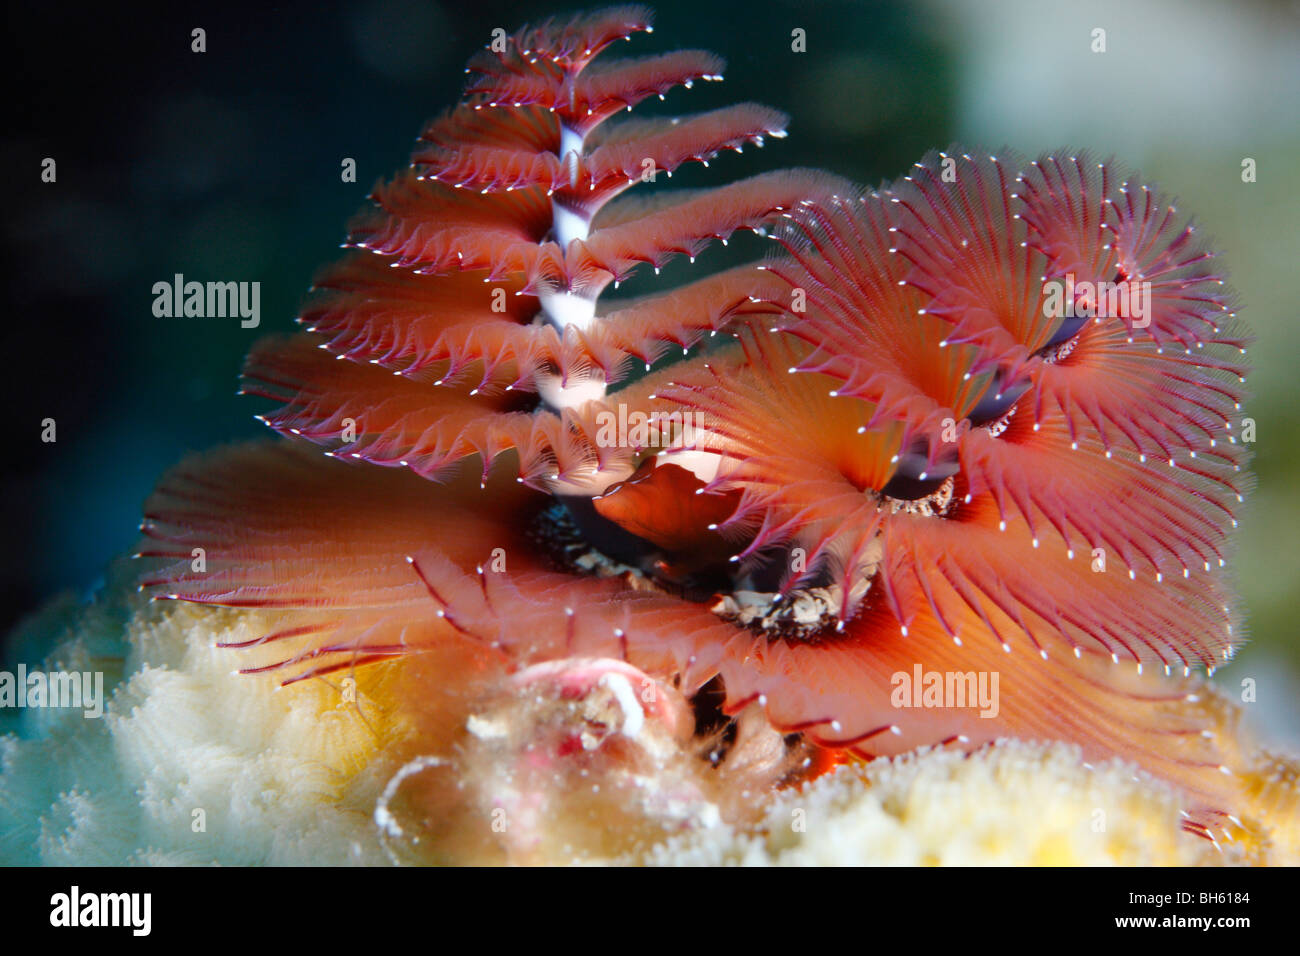 Red christmas tree worm attached to a surface of brain coral polyps, showing dual spiral structure with feather-like appendages Stock Photo